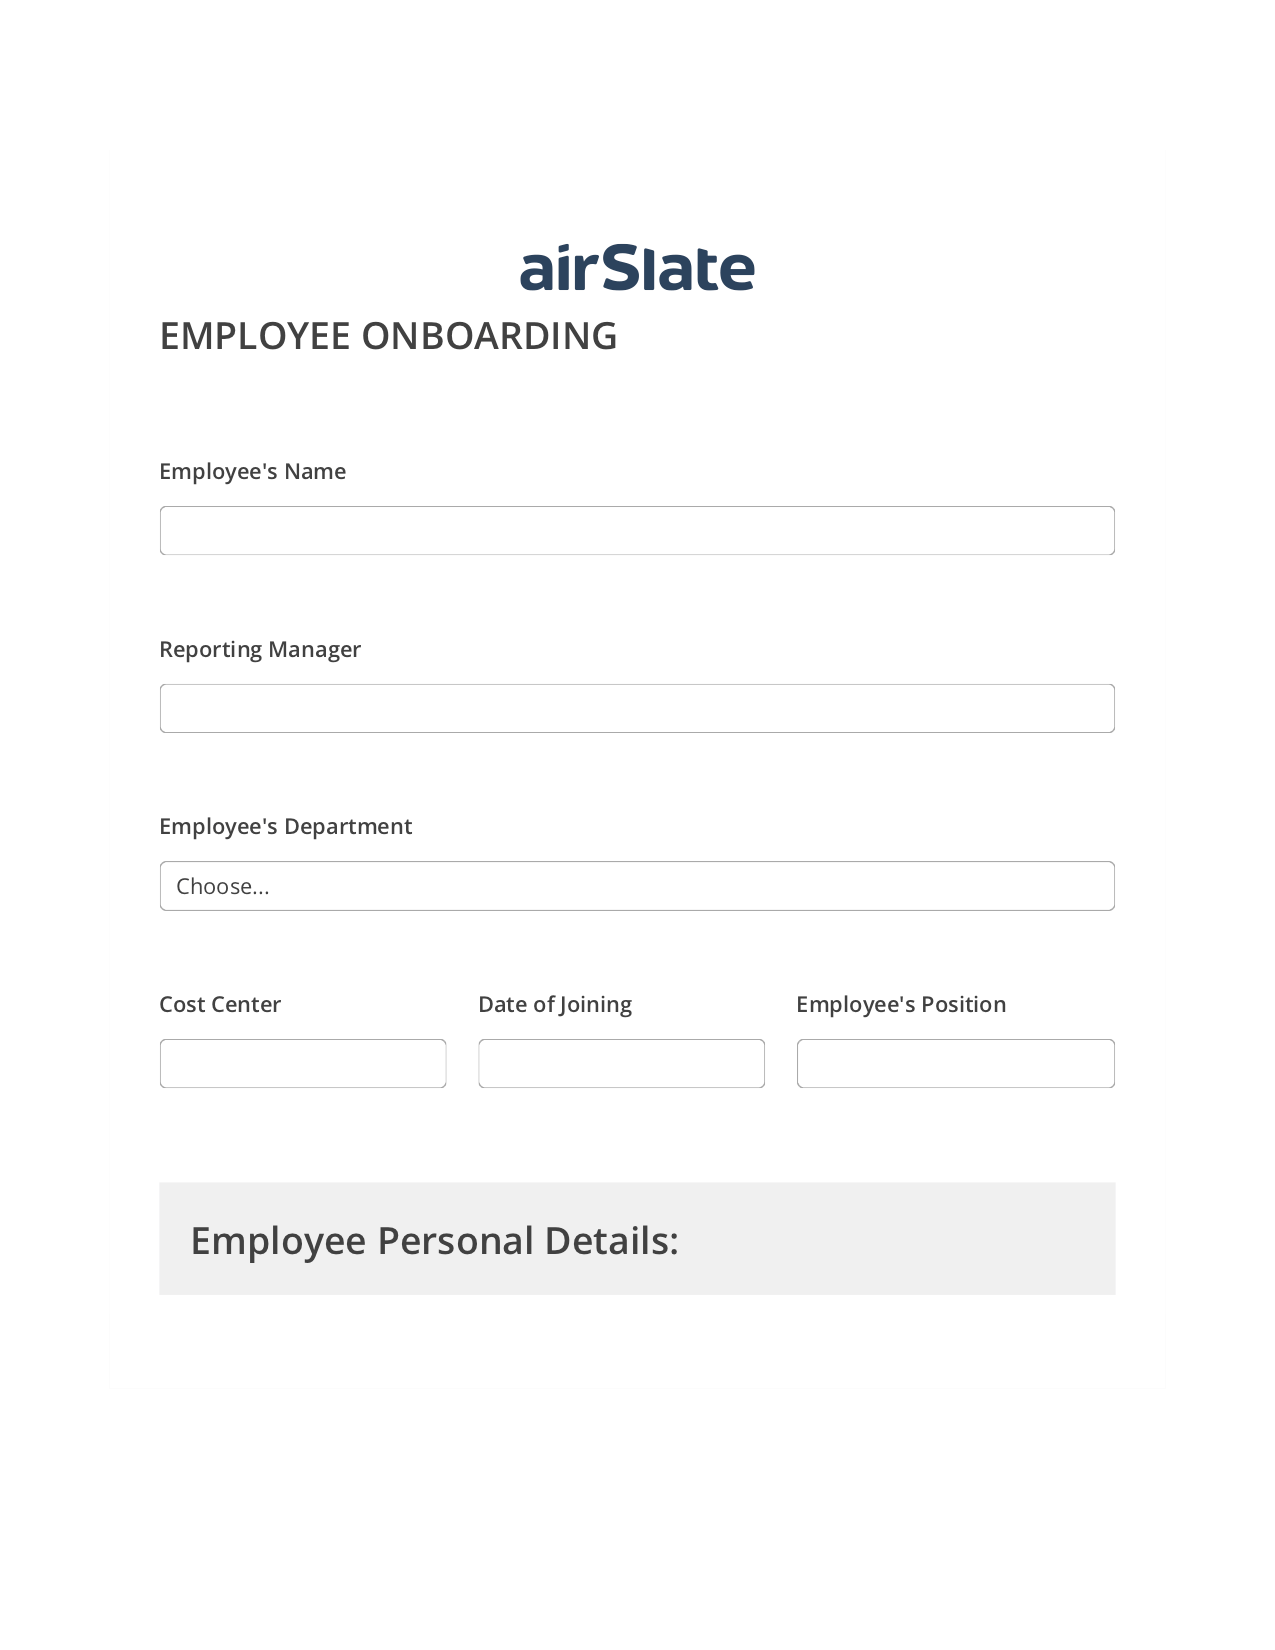 Employee Onboarding Workflow Pre-fill from CSV File Bot, Create slate bot, Post-finish Document Bot